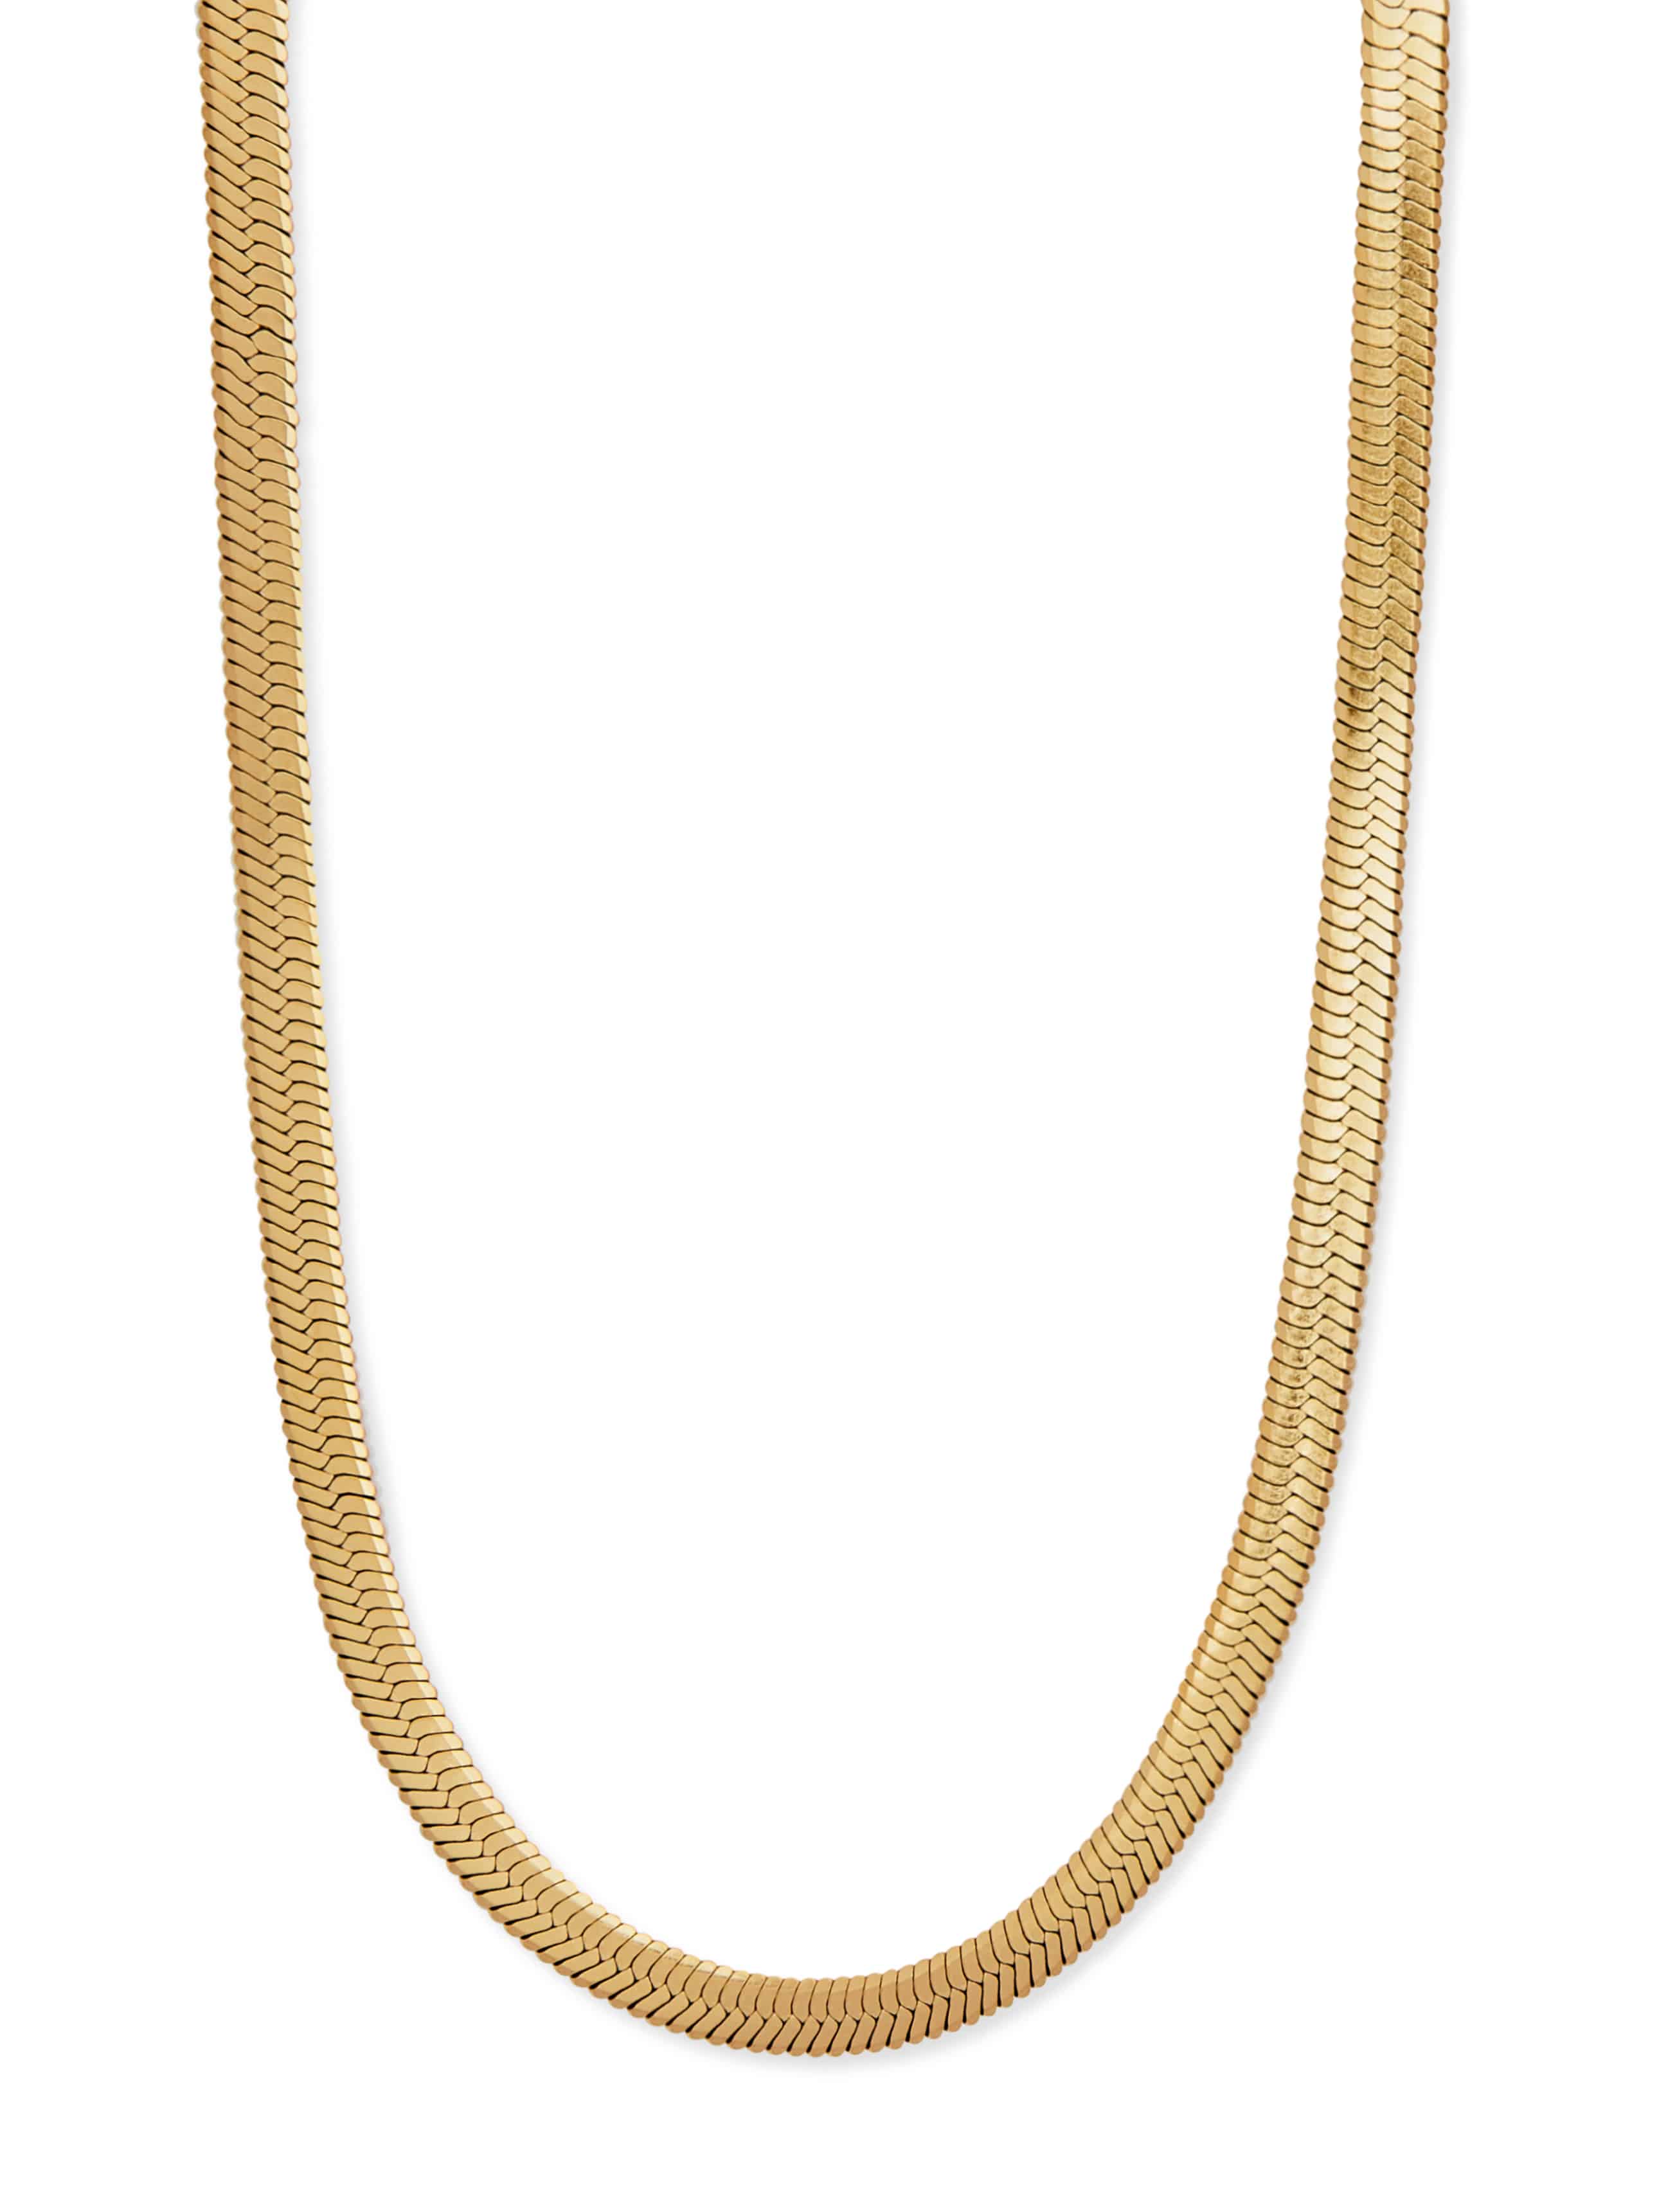 Ky & Co Double Link Thick Chain Necklace Gold Tone Chunky 18